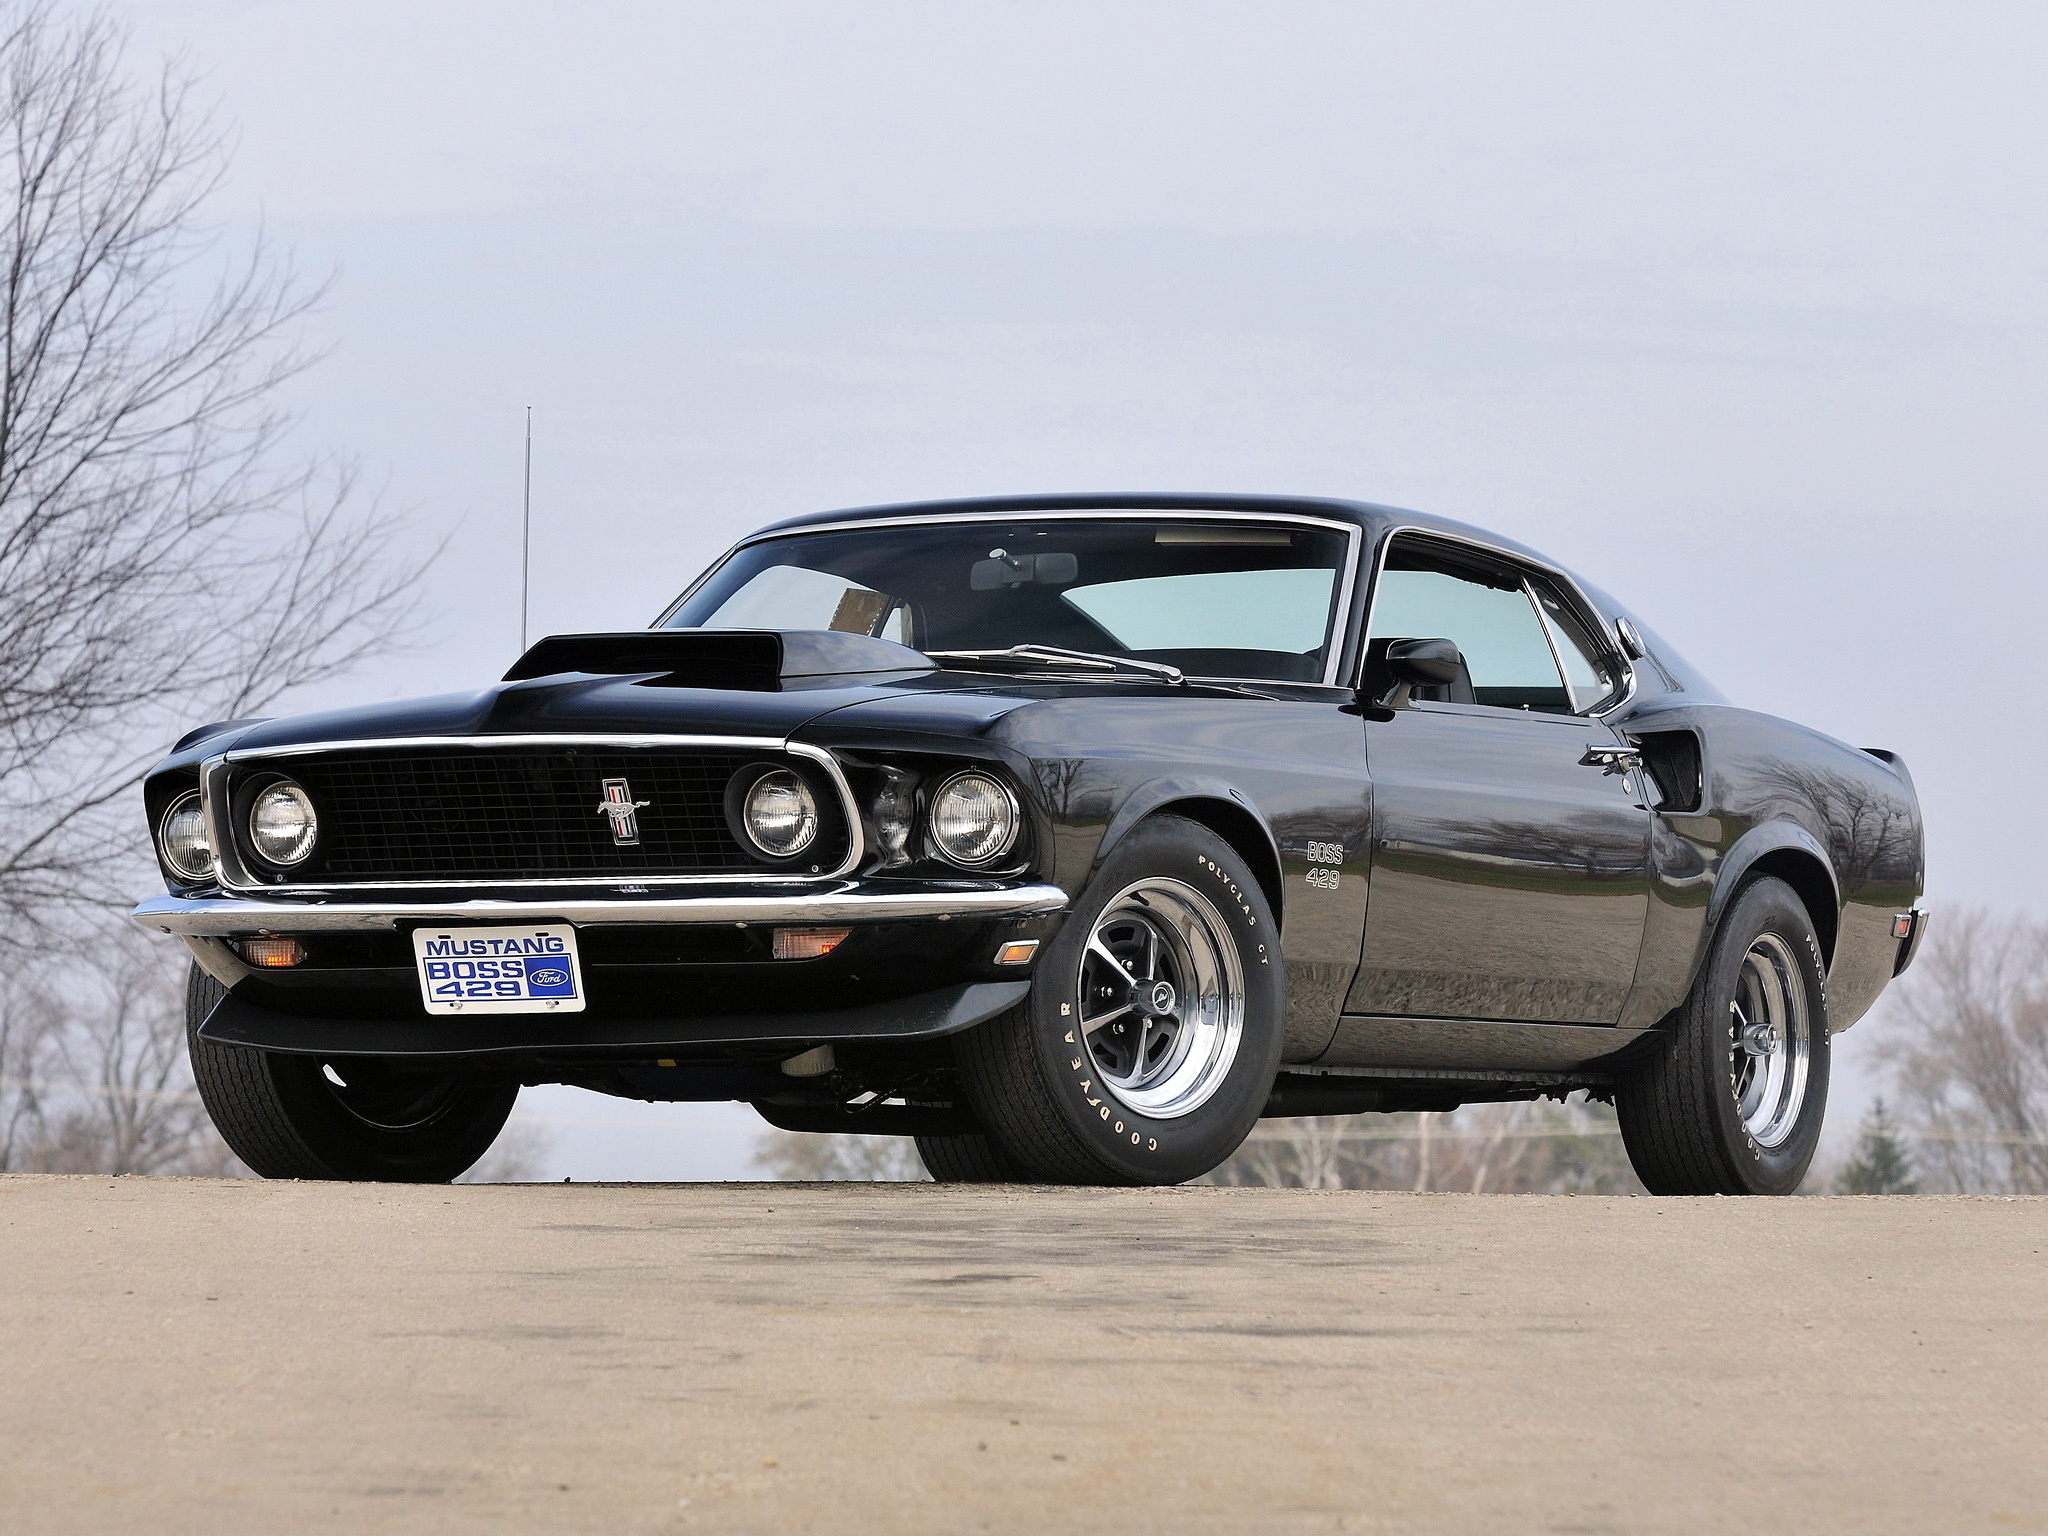 1080p Muscle Car Hd Images